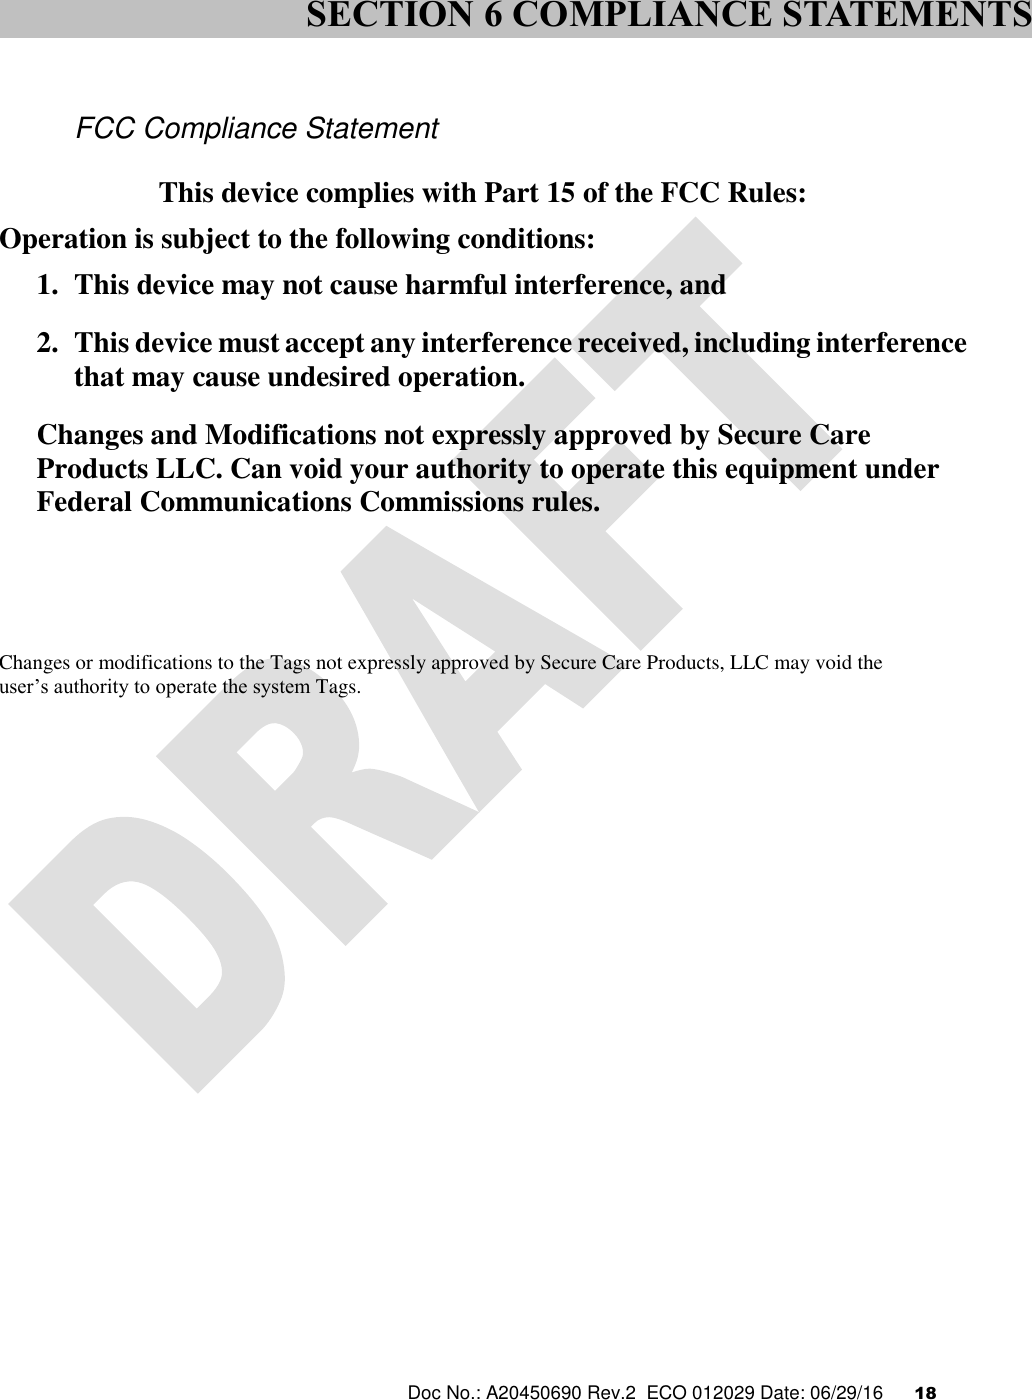  Doc No.: A20450690 Rev.2  ECO 012029 Date: 06/29/16      18     FCC Compliance Statement  This device complies with Part 15 of the FCC Rules: Operation is subject to the following conditions: 1. This device may not cause harmful interference, and 2. This device must accept any interference received, including interference that may cause undesired operation. Changes and Modifications not expressly approved by Secure Care Products LLC. Can void your authority to operate this equipment under Federal Communications Commissions rules.      Changes or modifications to the Tags not expressly approved by Secure Care Products, LLC may void the  user’s authority to operate the system Tags.     SECTION 6 COMPLIANCE STATEMENTS 